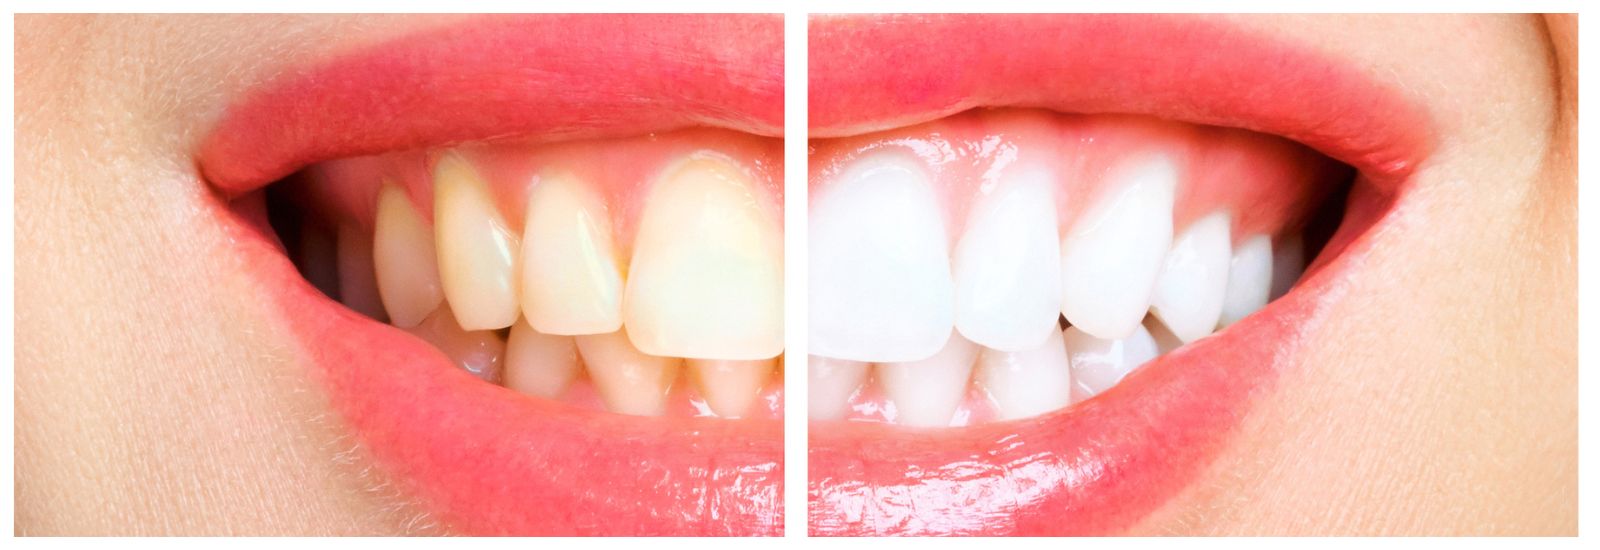 A before and after picture of teeth whitening